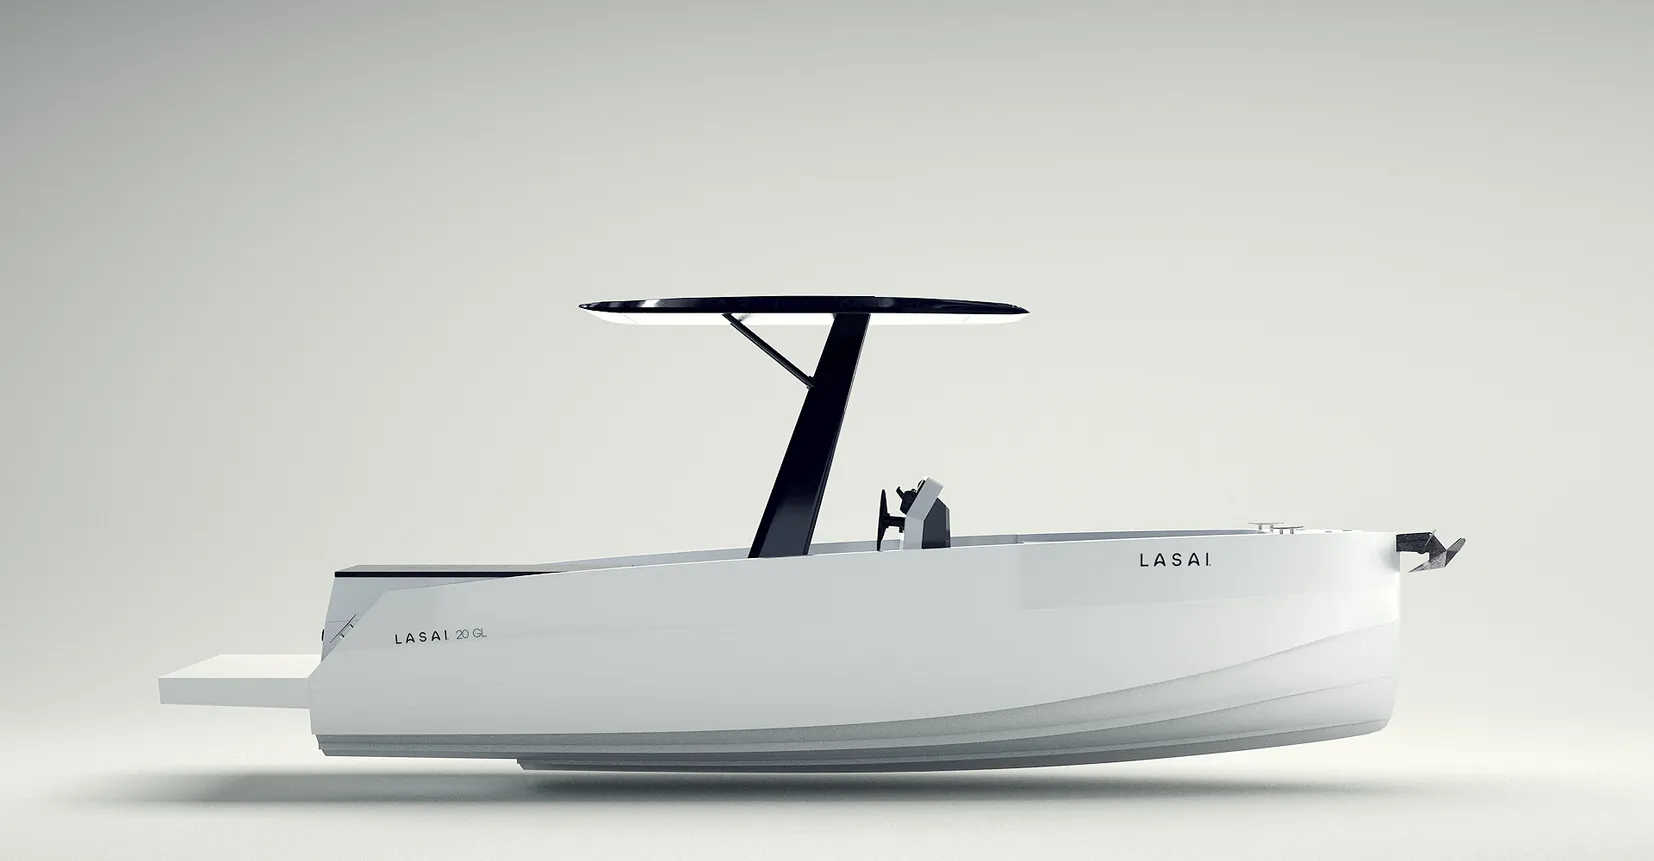 Industrial design of a boat by Nacar Design